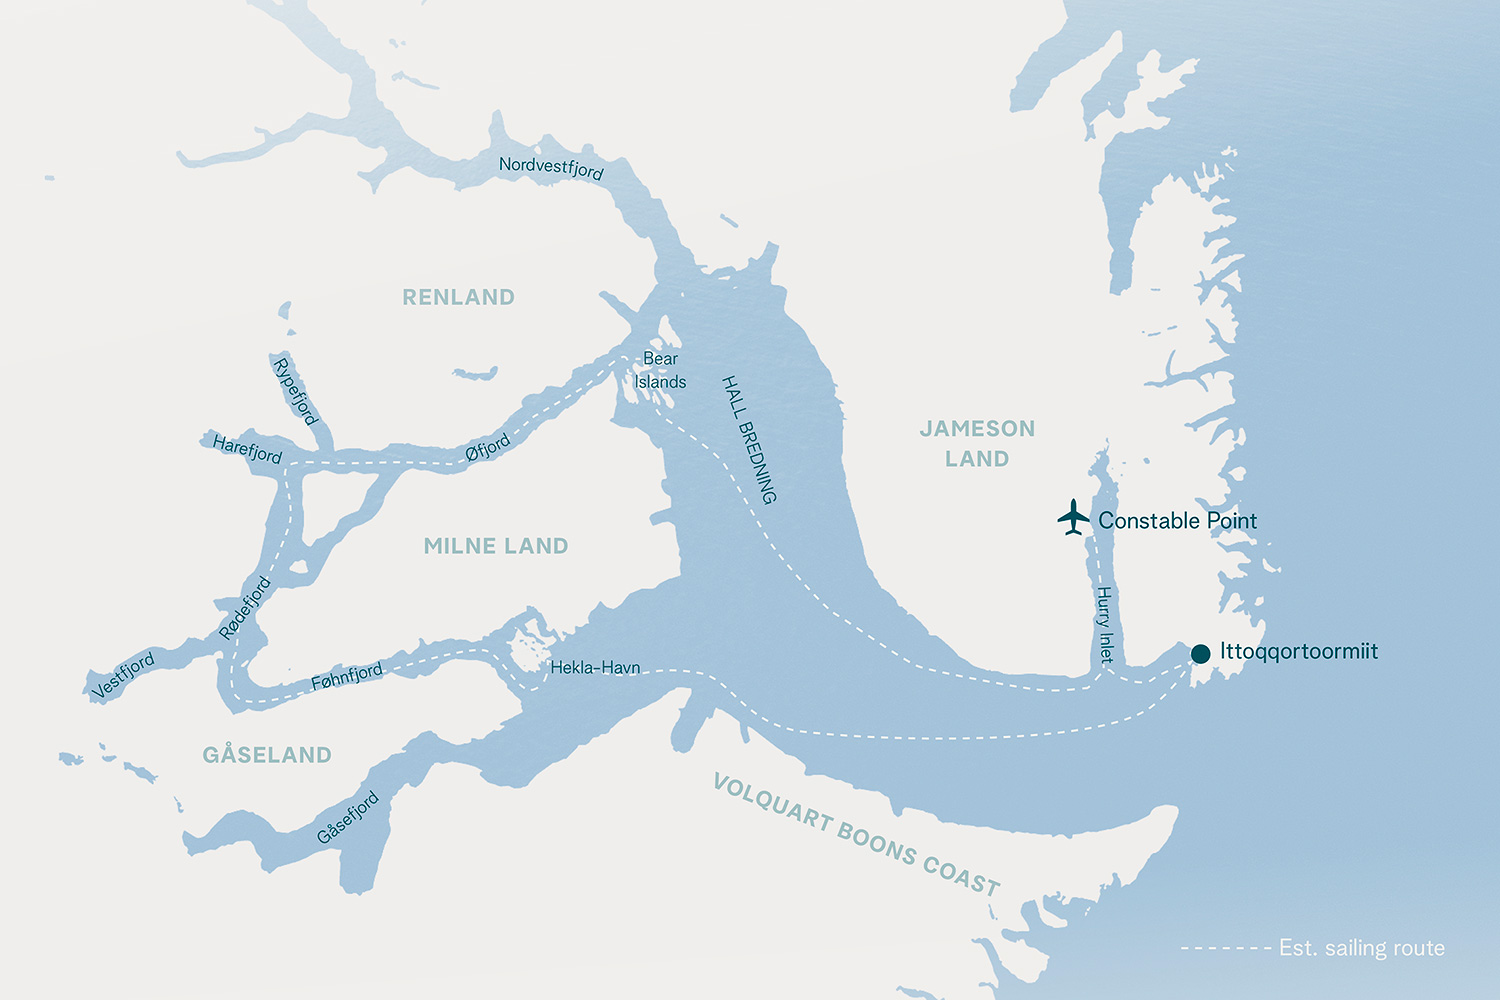 Scoresby Sound Map estimated sailing route